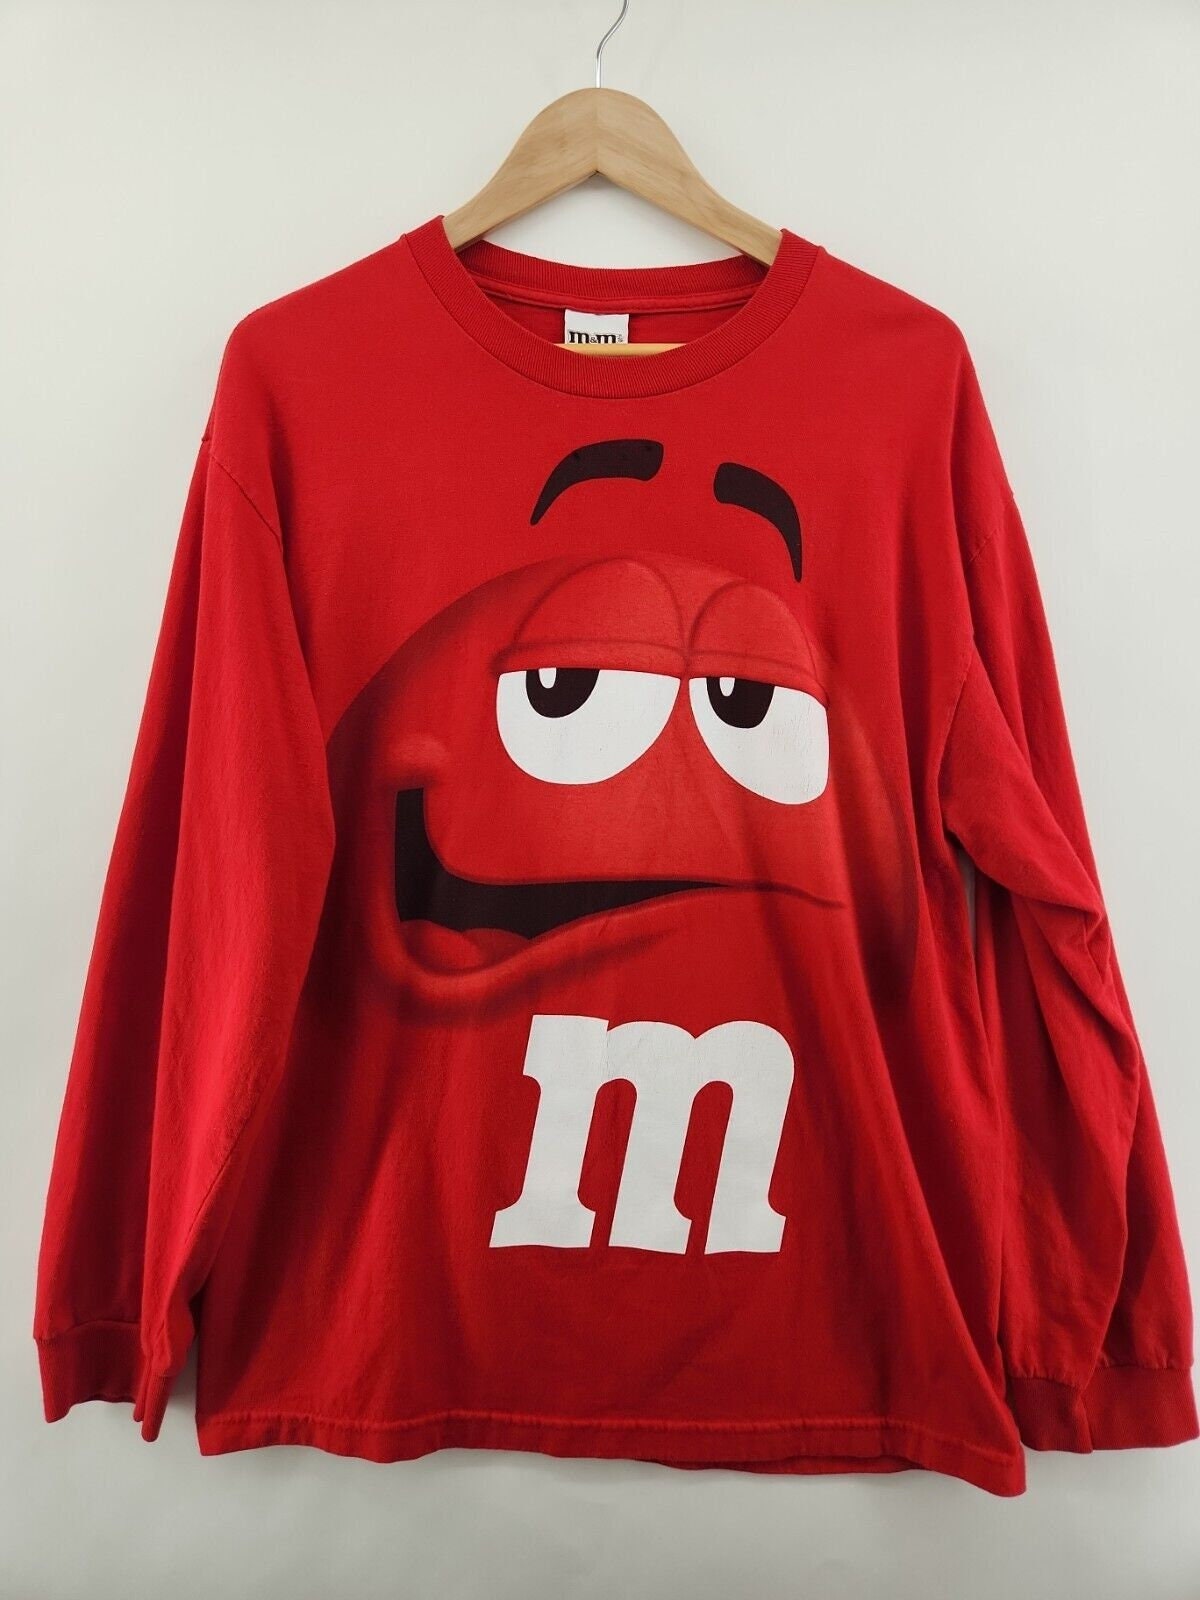 M & M's Shirt Vintage Y2K Candy Red Long Sleeve AOP Graphic